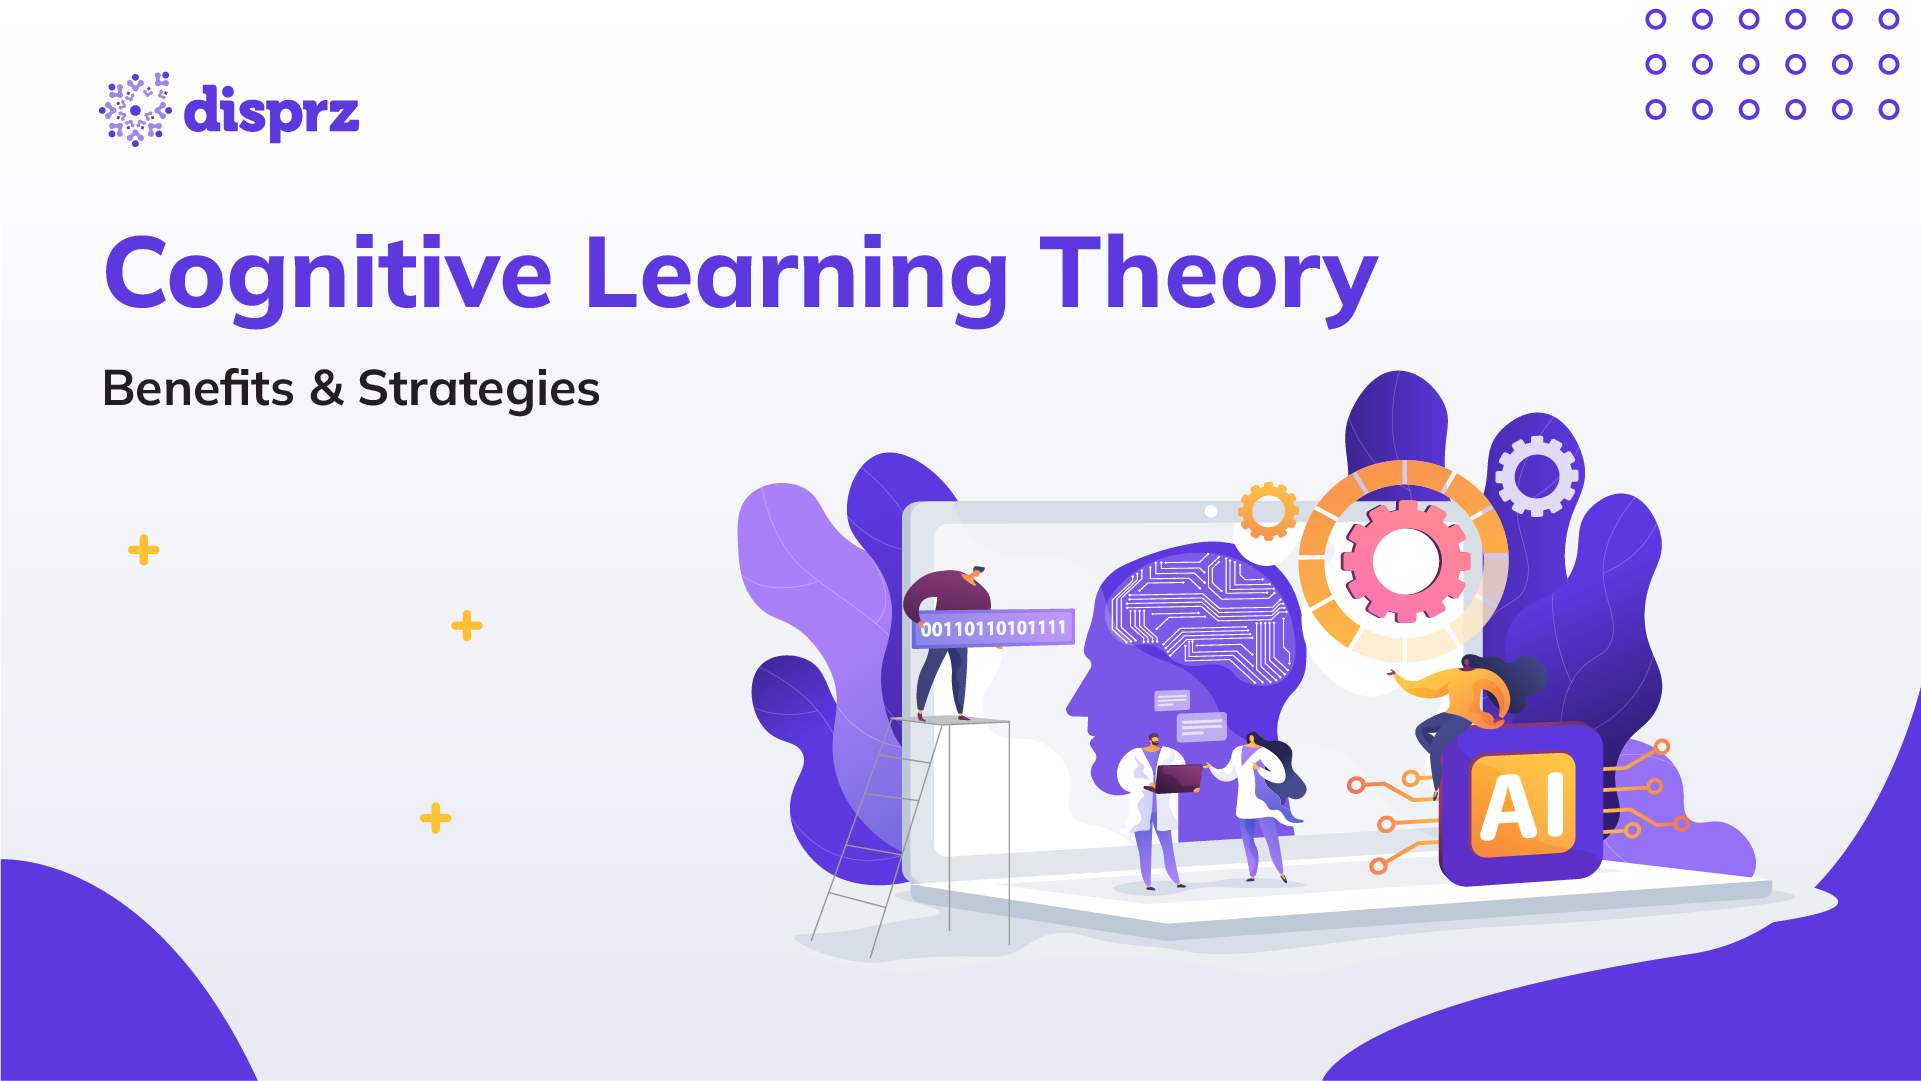 Cognitive learning theory benefits & strategies